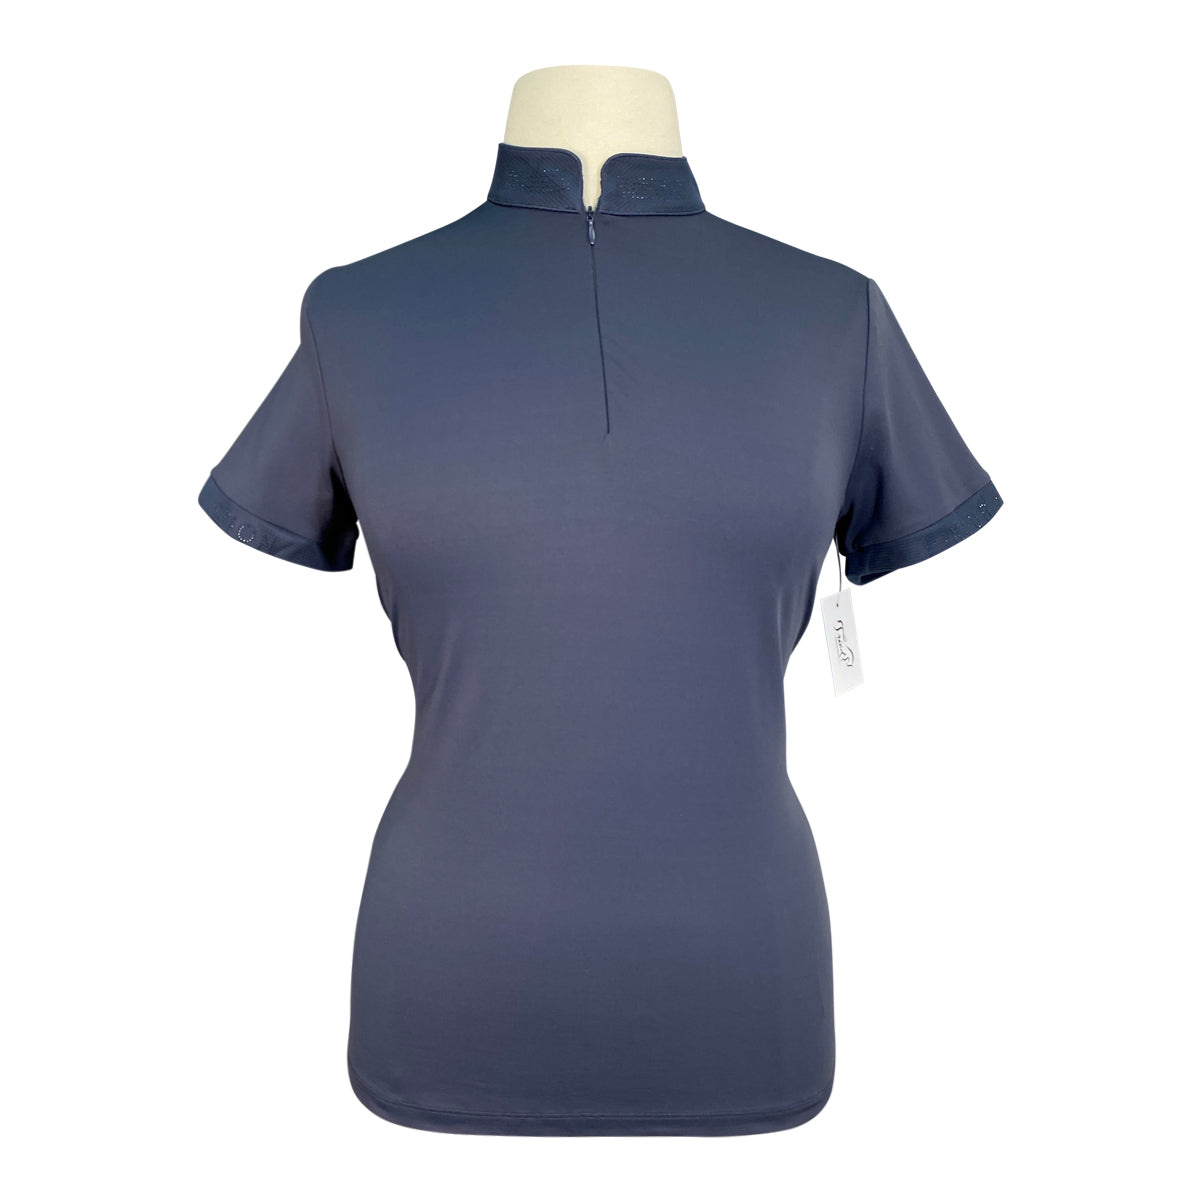 Pikeur 'Pernille' S/S Zip Shirt in Blueberry